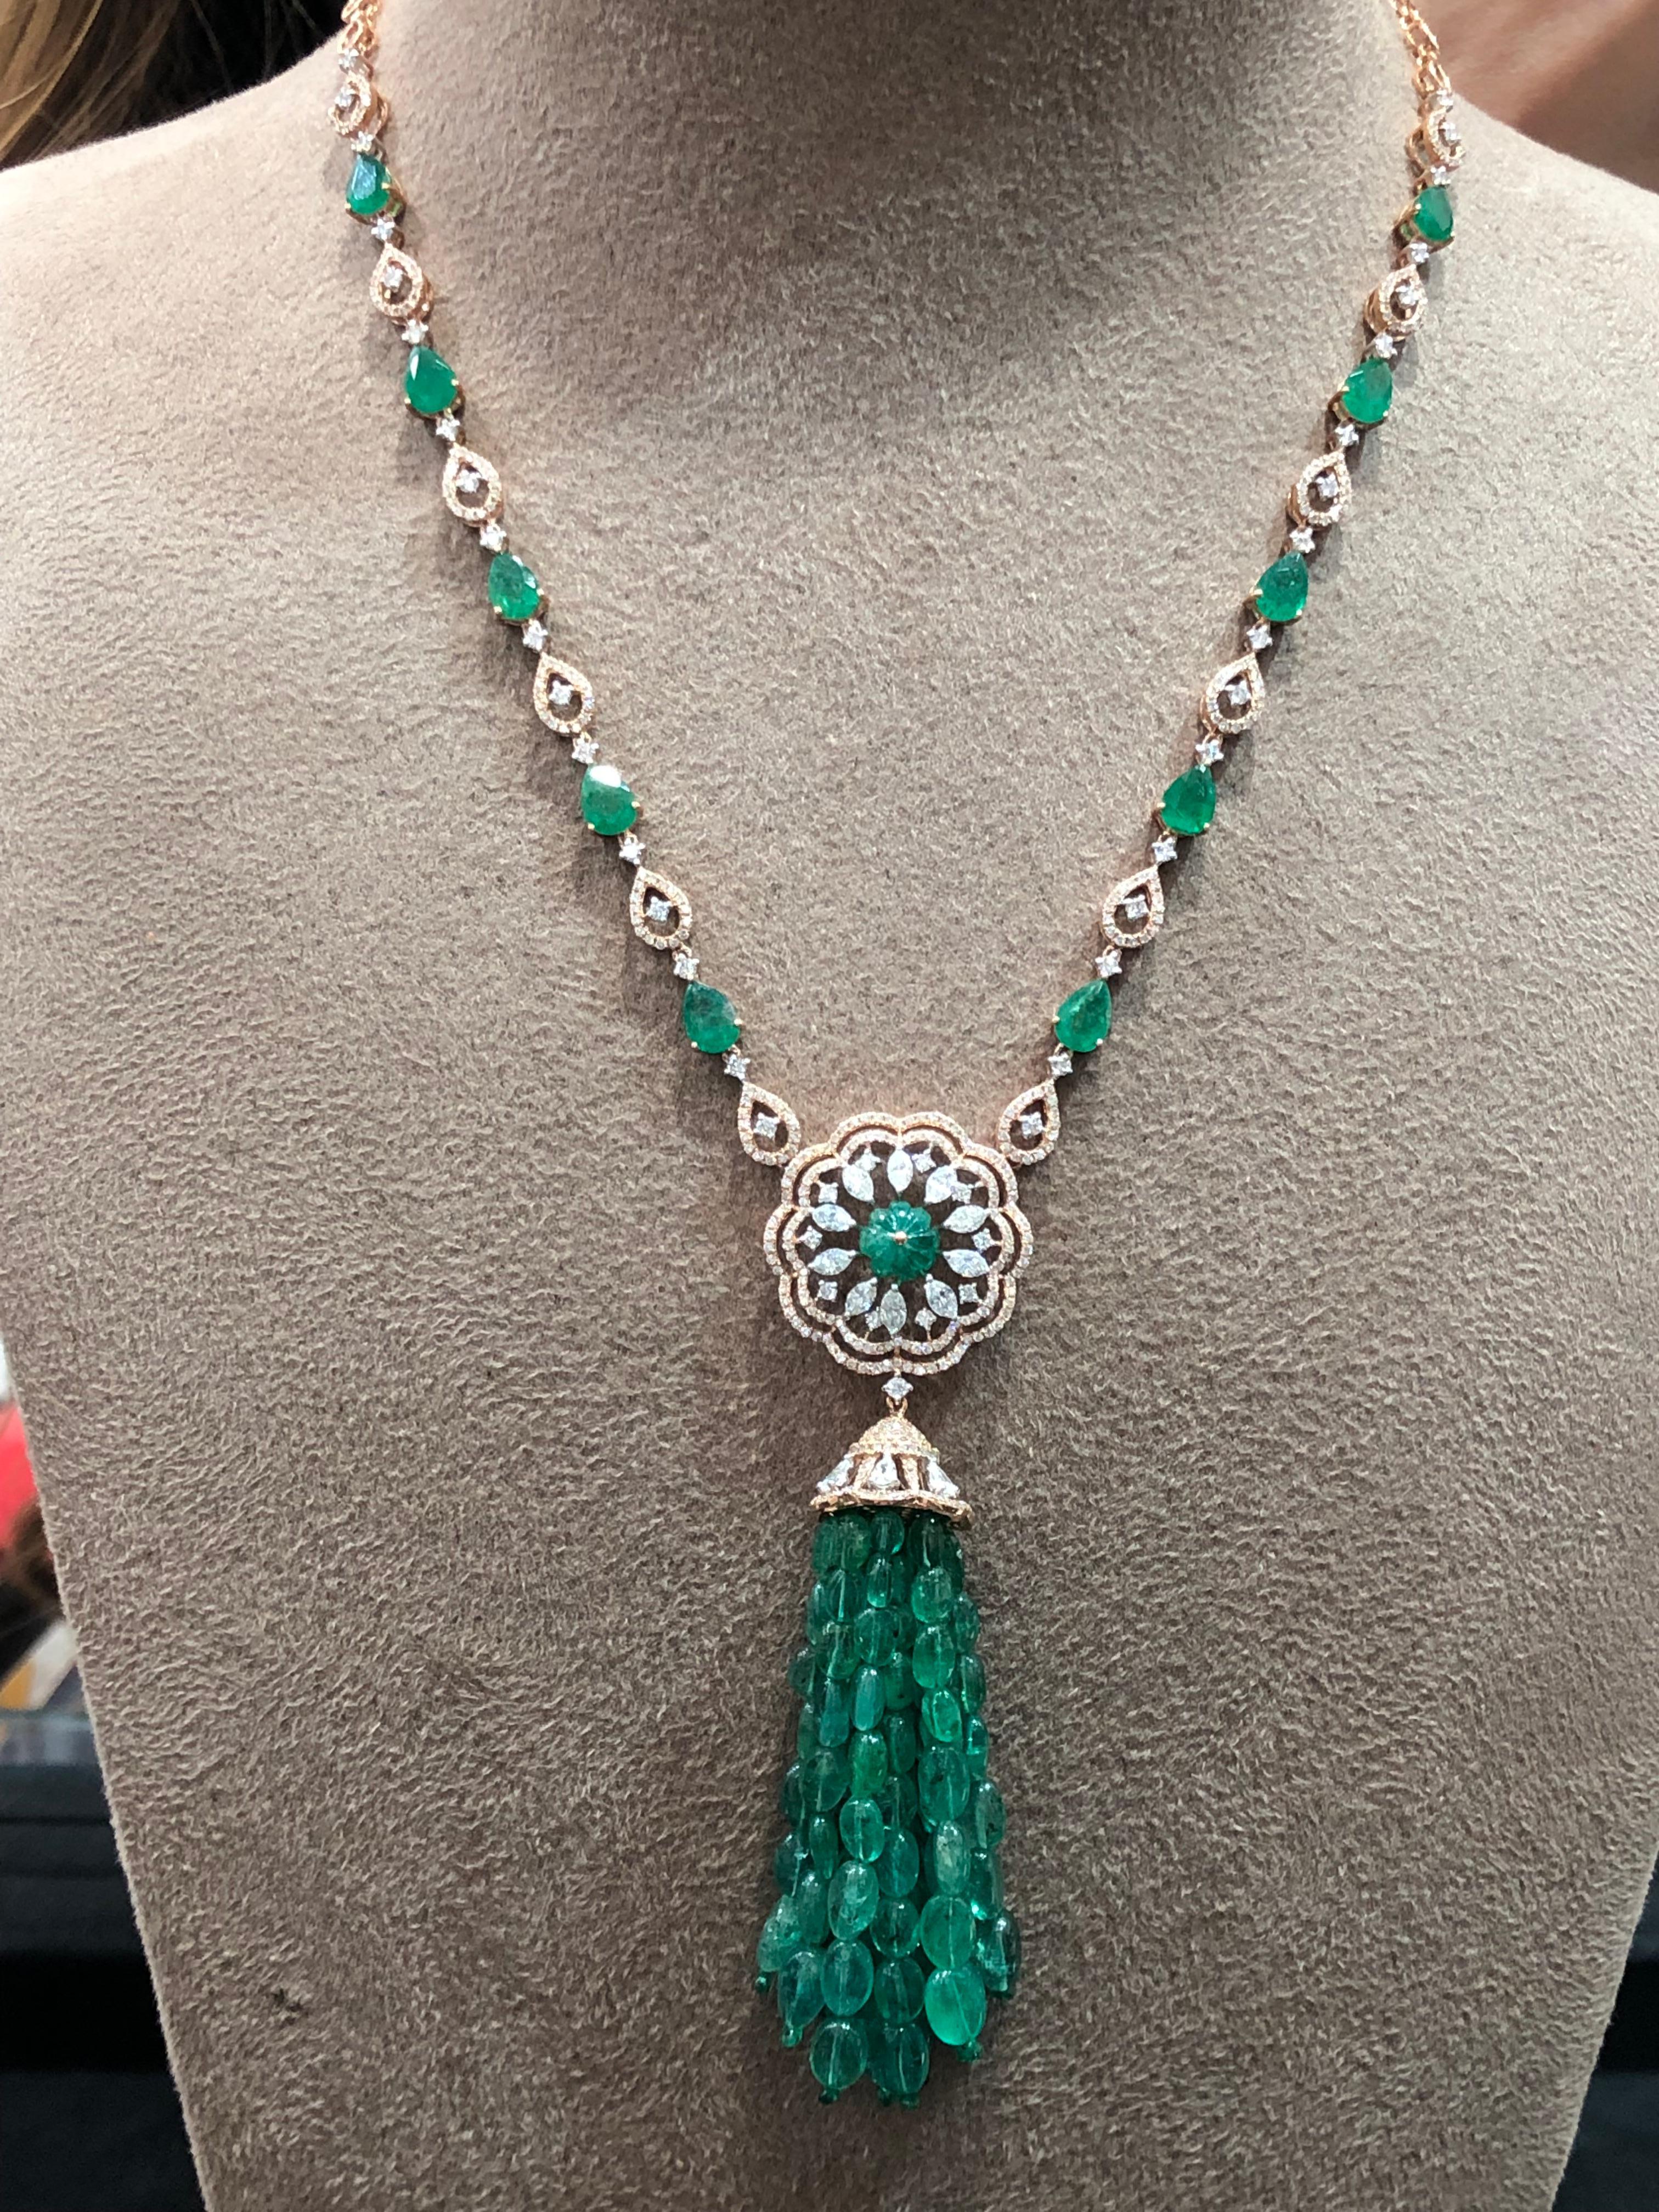 Diamonds: 3.52 carats
Emeralds: 68.31 carats
18kt Gold: 22.75 grams
Ref No: DPS-HA

Glamorous and feminine, the combination of the floral motif and delicate movement of emerald beads is sure to provide precious company from a romantic date to a